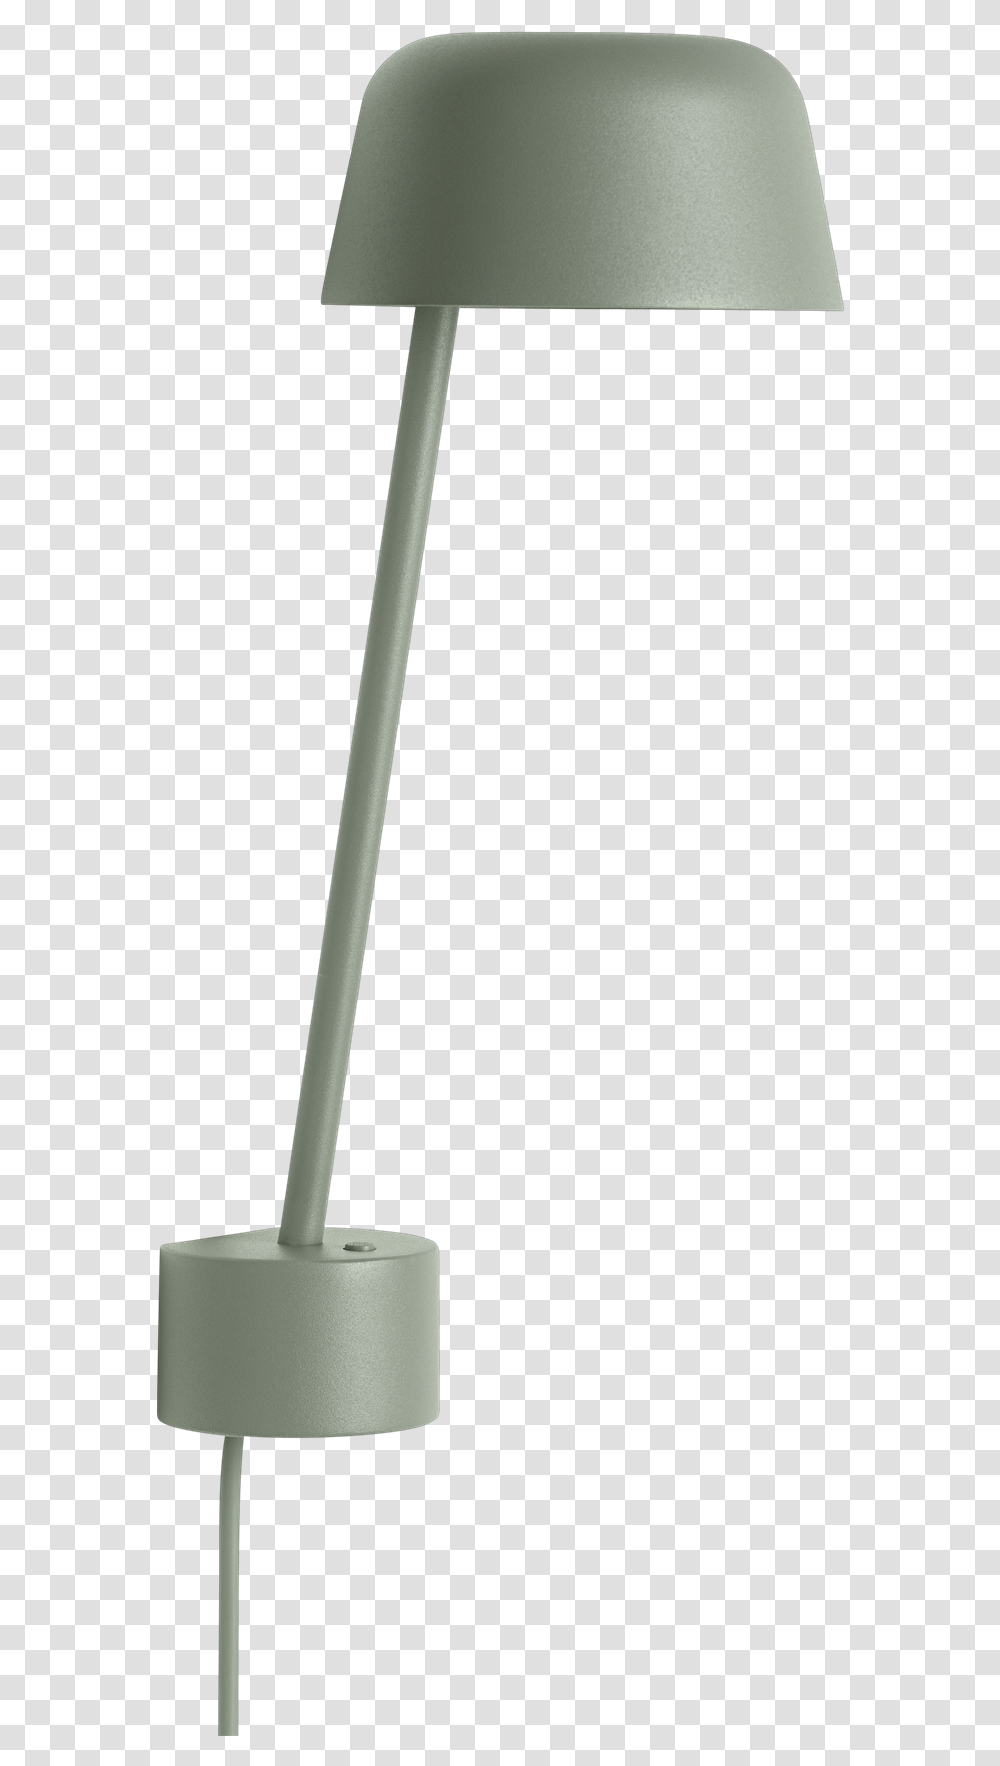 Lean Wall Lamp Master Lean Wall Lamp Muuto Lean Wall Lamp, Weapon, Weaponry, Emblem Transparent Png